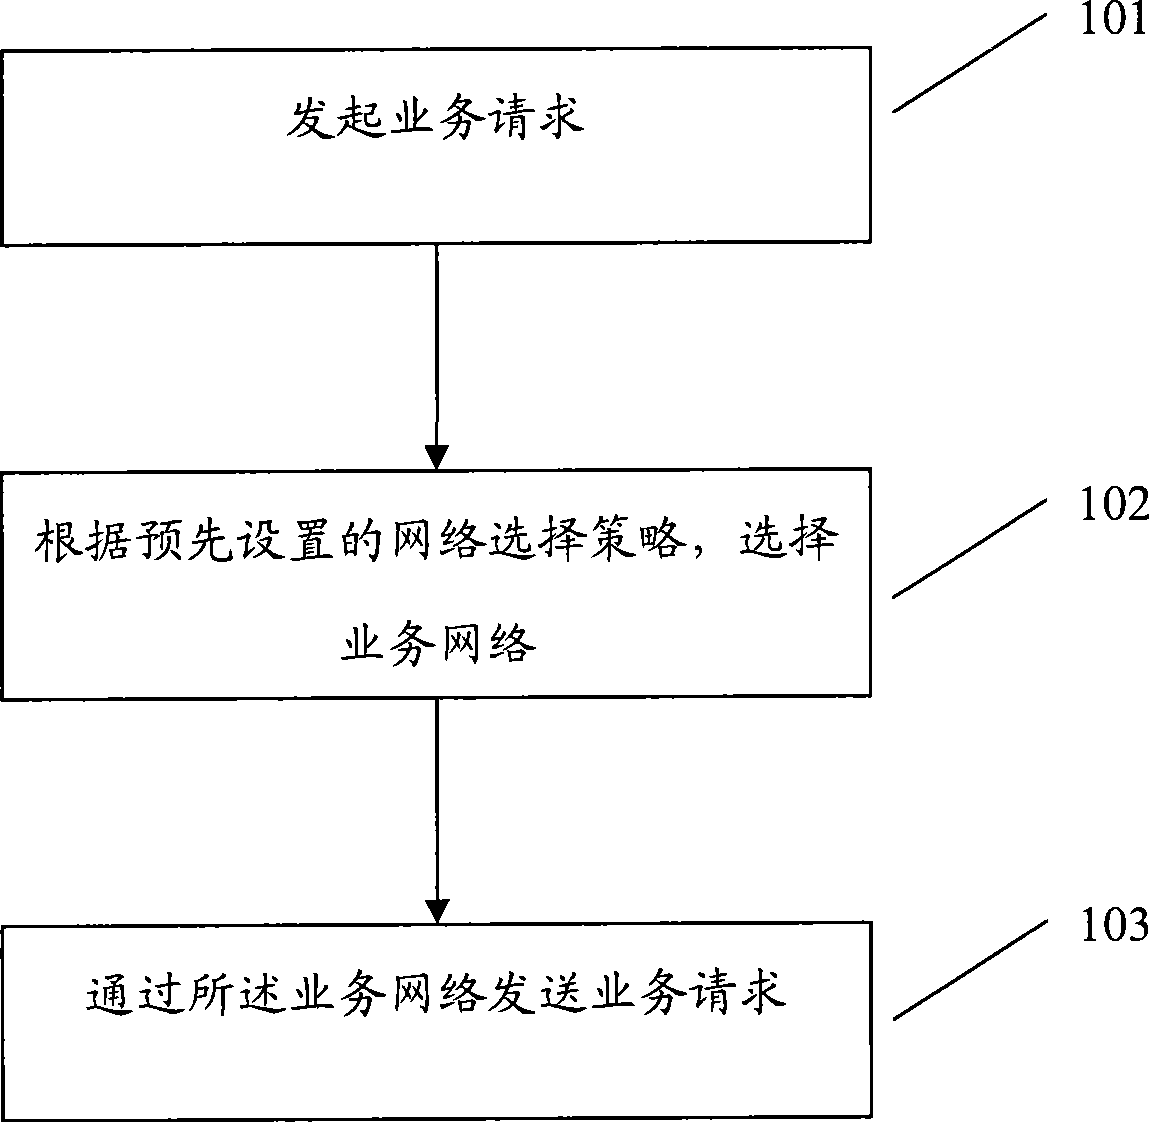 Method for selecting service network by multi-mode terminal and multi-mode mobile terminal